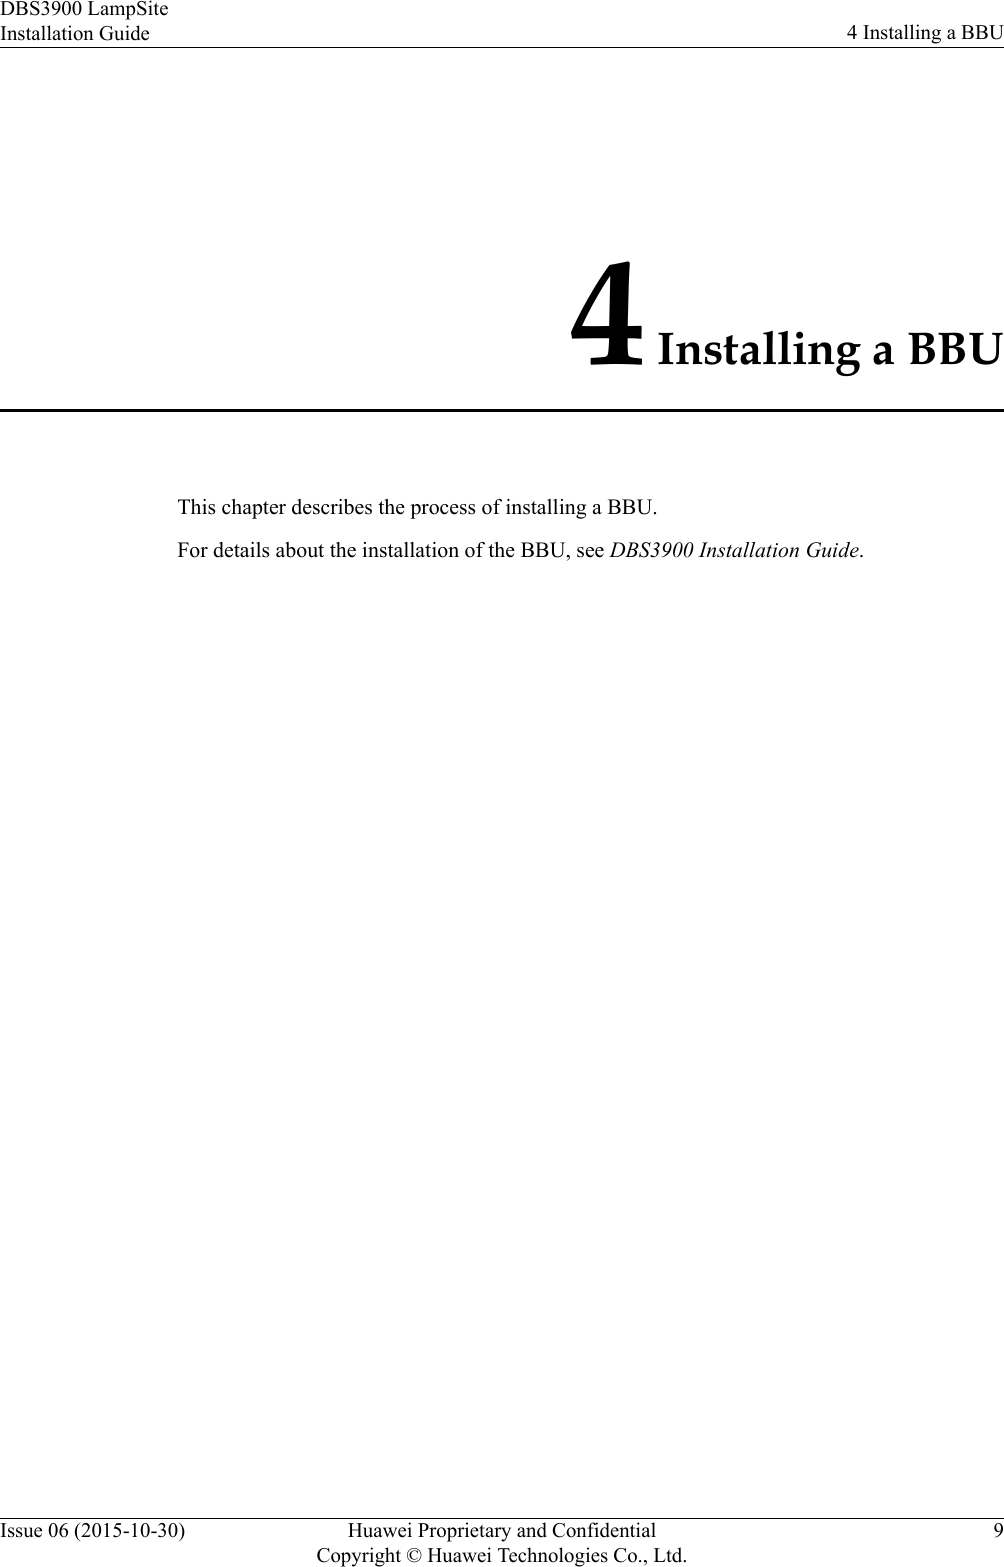 4 Installing a BBUThis chapter describes the process of installing a BBU.For details about the installation of the BBU, see DBS3900 Installation Guide.DBS3900 LampSiteInstallation Guide 4 Installing a BBUIssue 06 (2015-10-30) Huawei Proprietary and ConfidentialCopyright © Huawei Technologies Co., Ltd.9